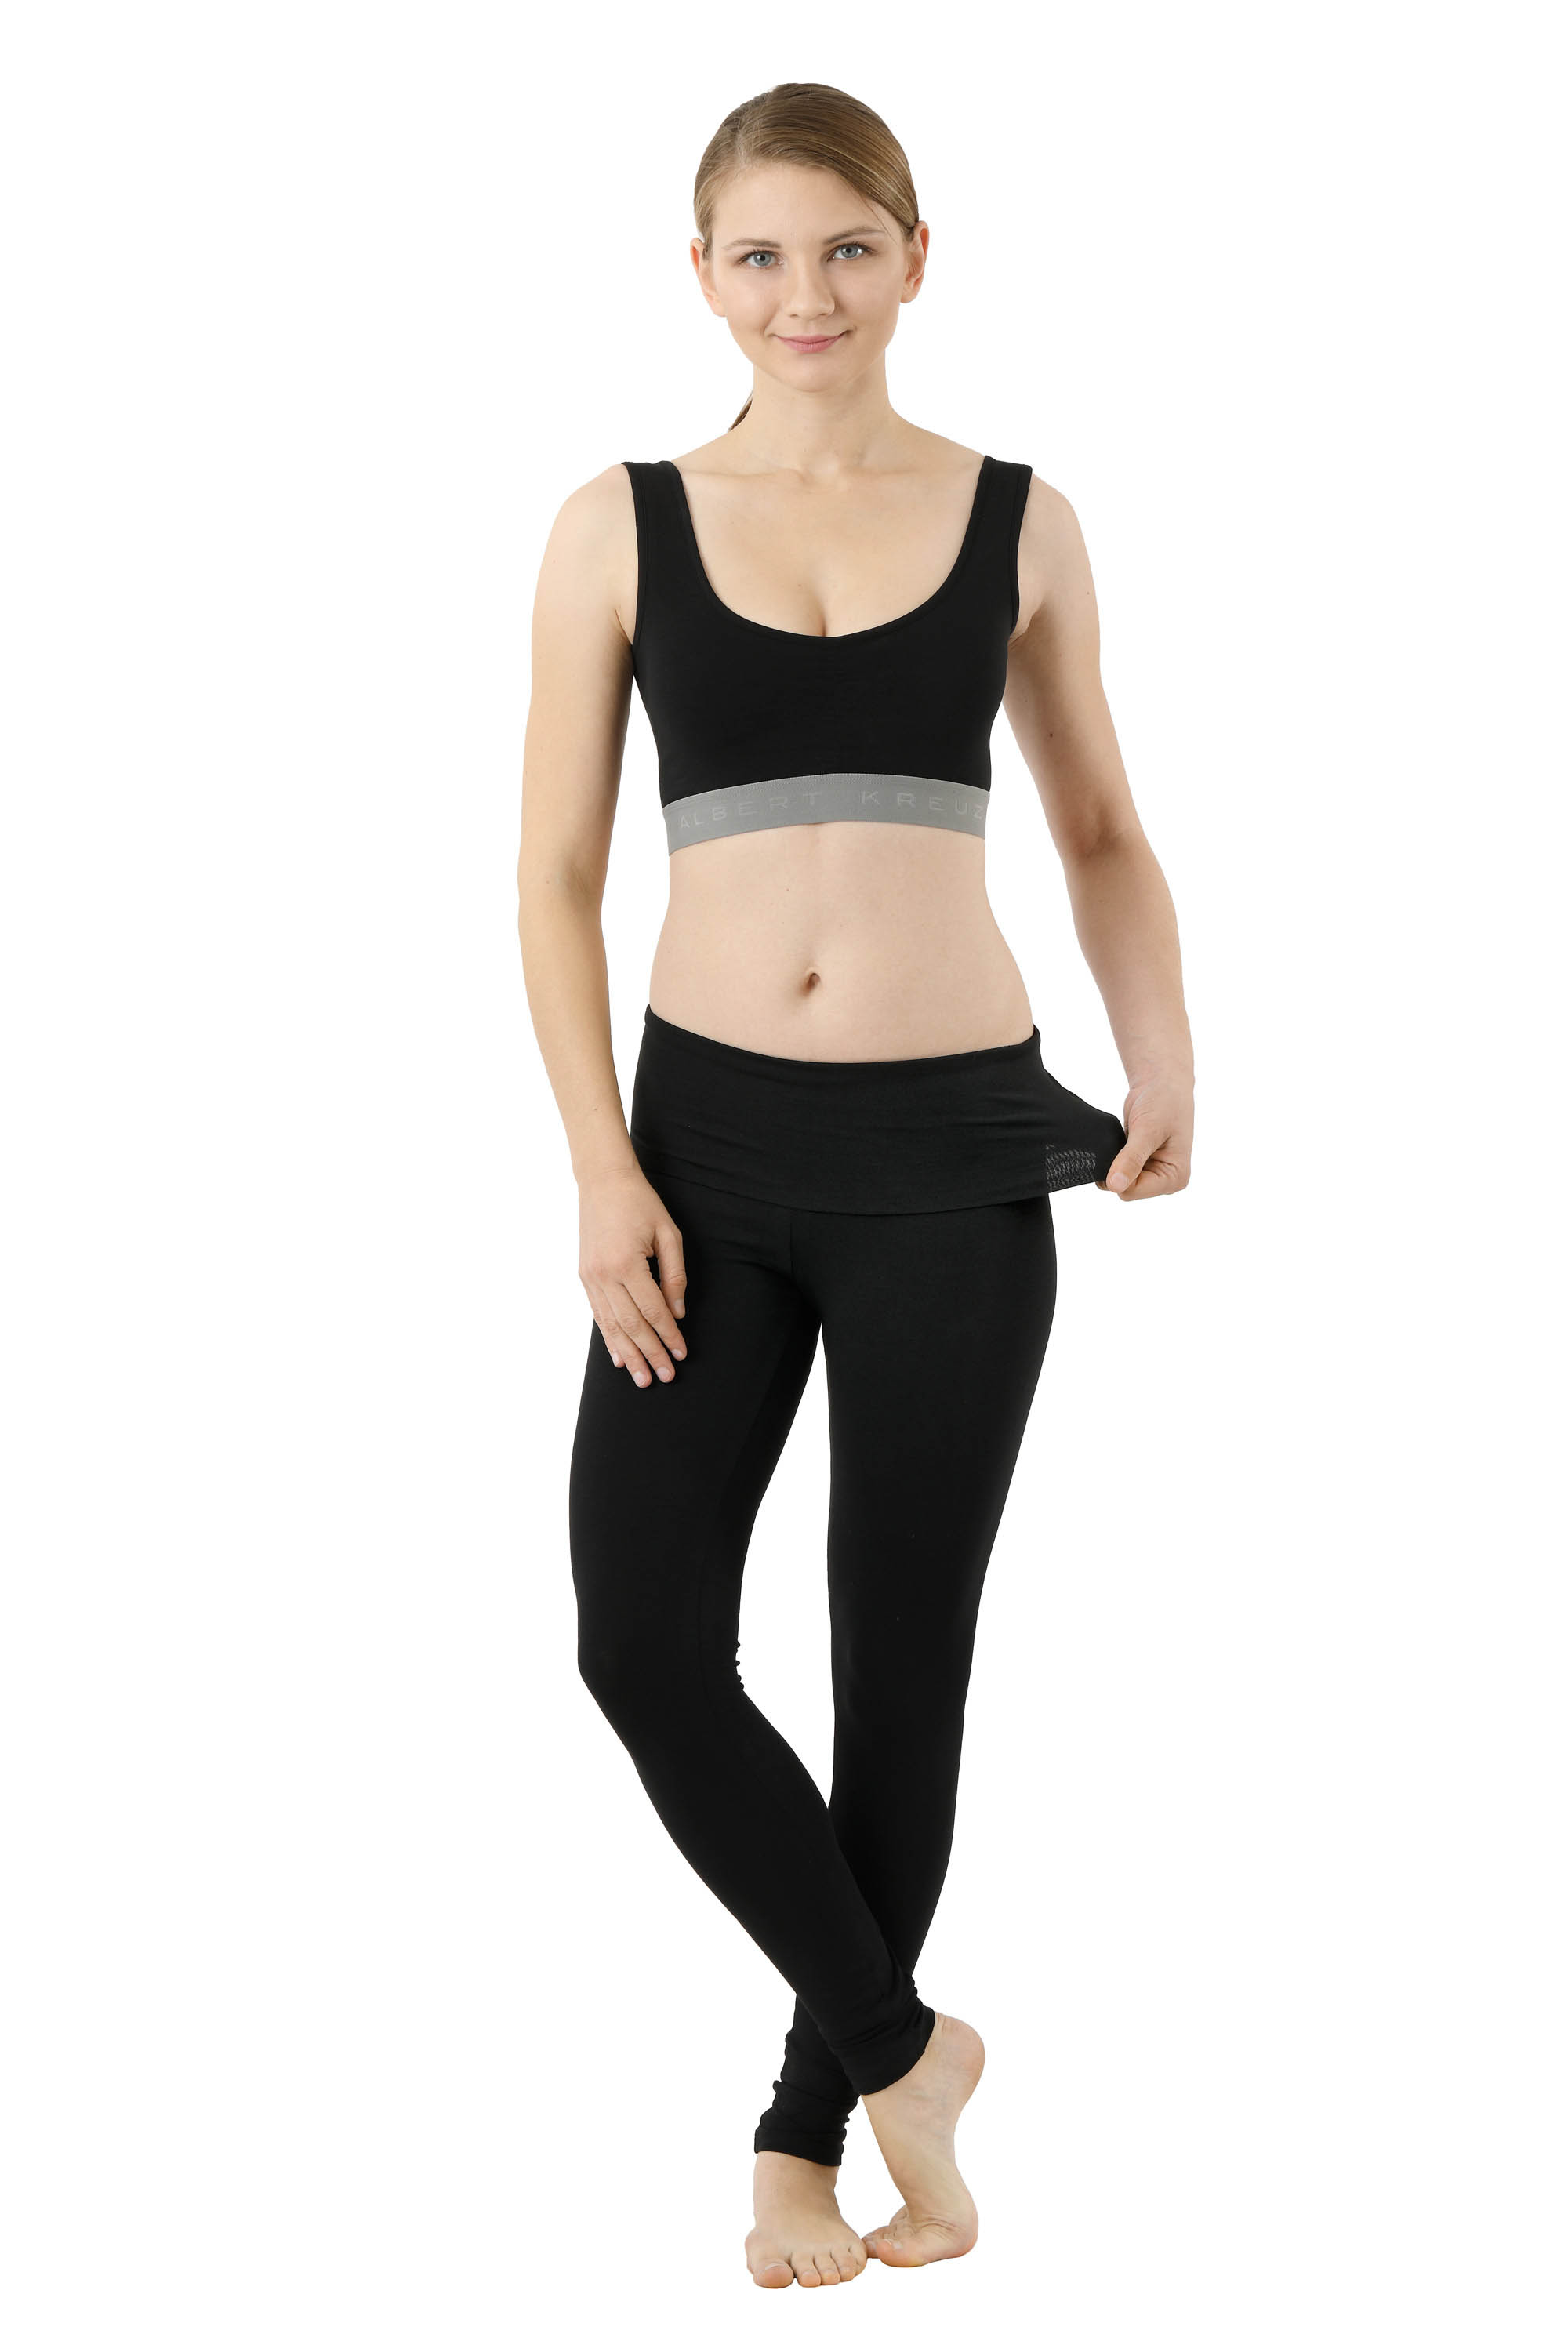  Stretch Is Comfort Womens Foldover Plus Size Yoga